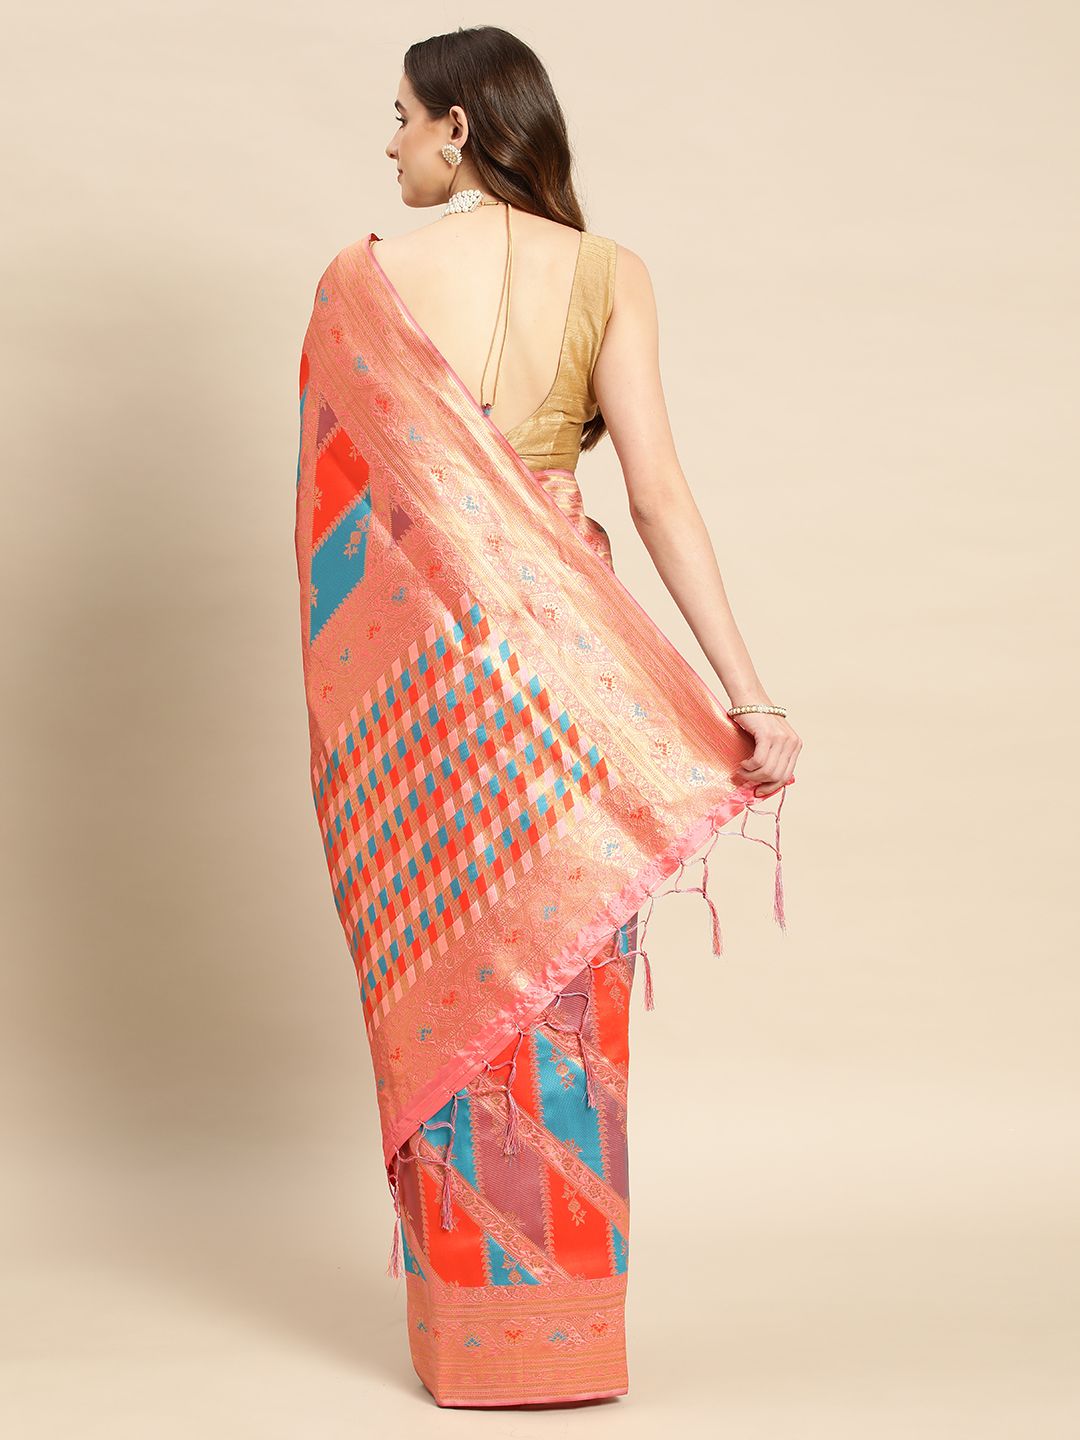 Peach Color Gorgeous Zari Border Silk Saree Perfect Blend of Tradition and Glamour